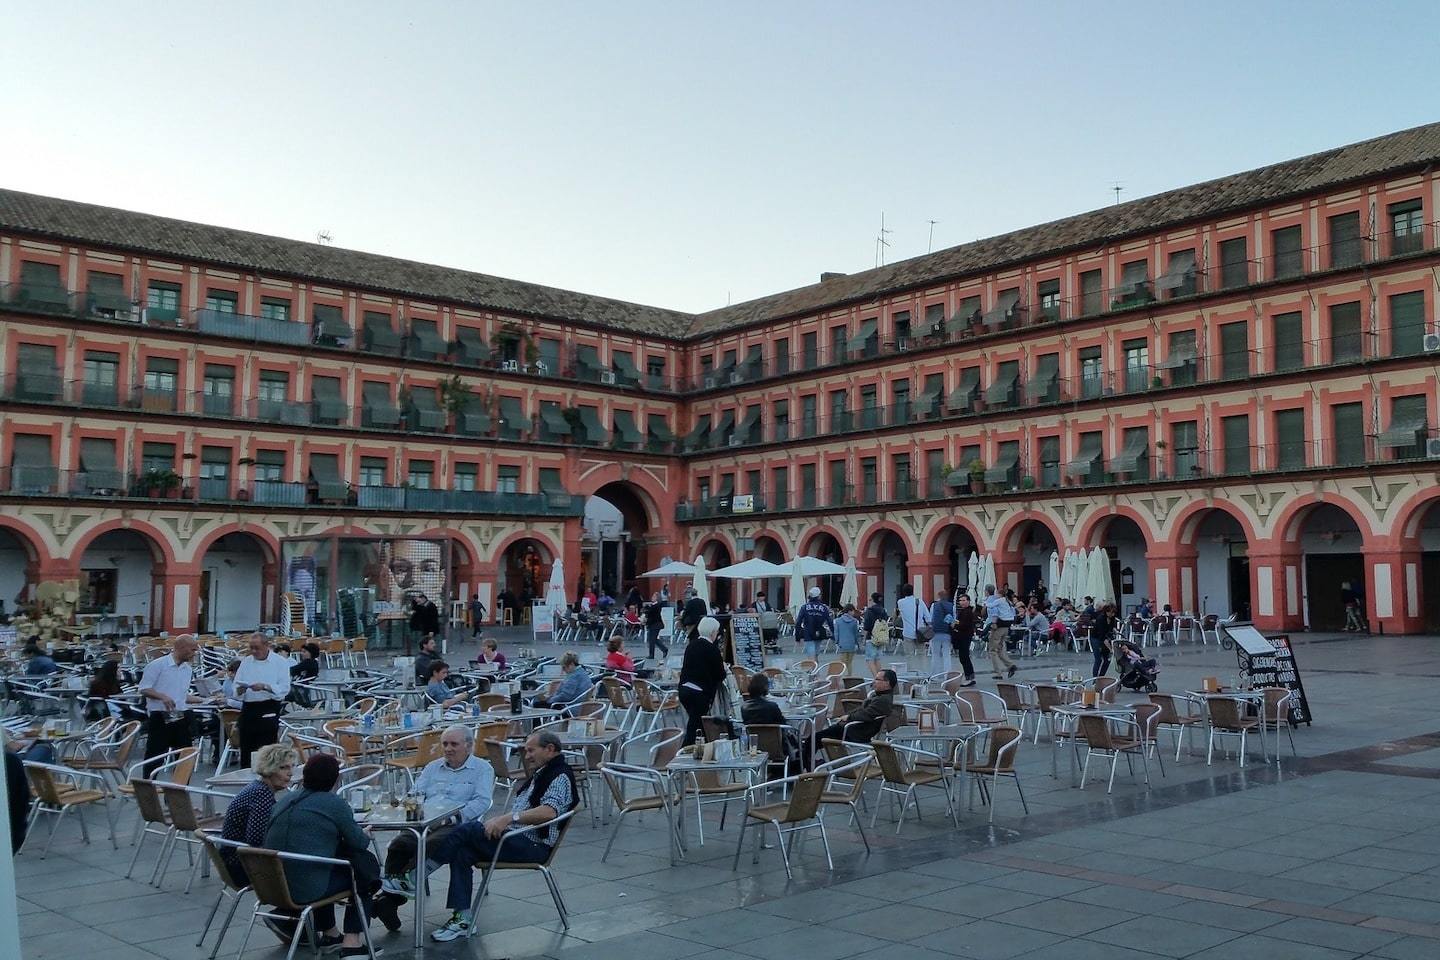 large plaza in Cordoba with people enjoying a meal or coffee